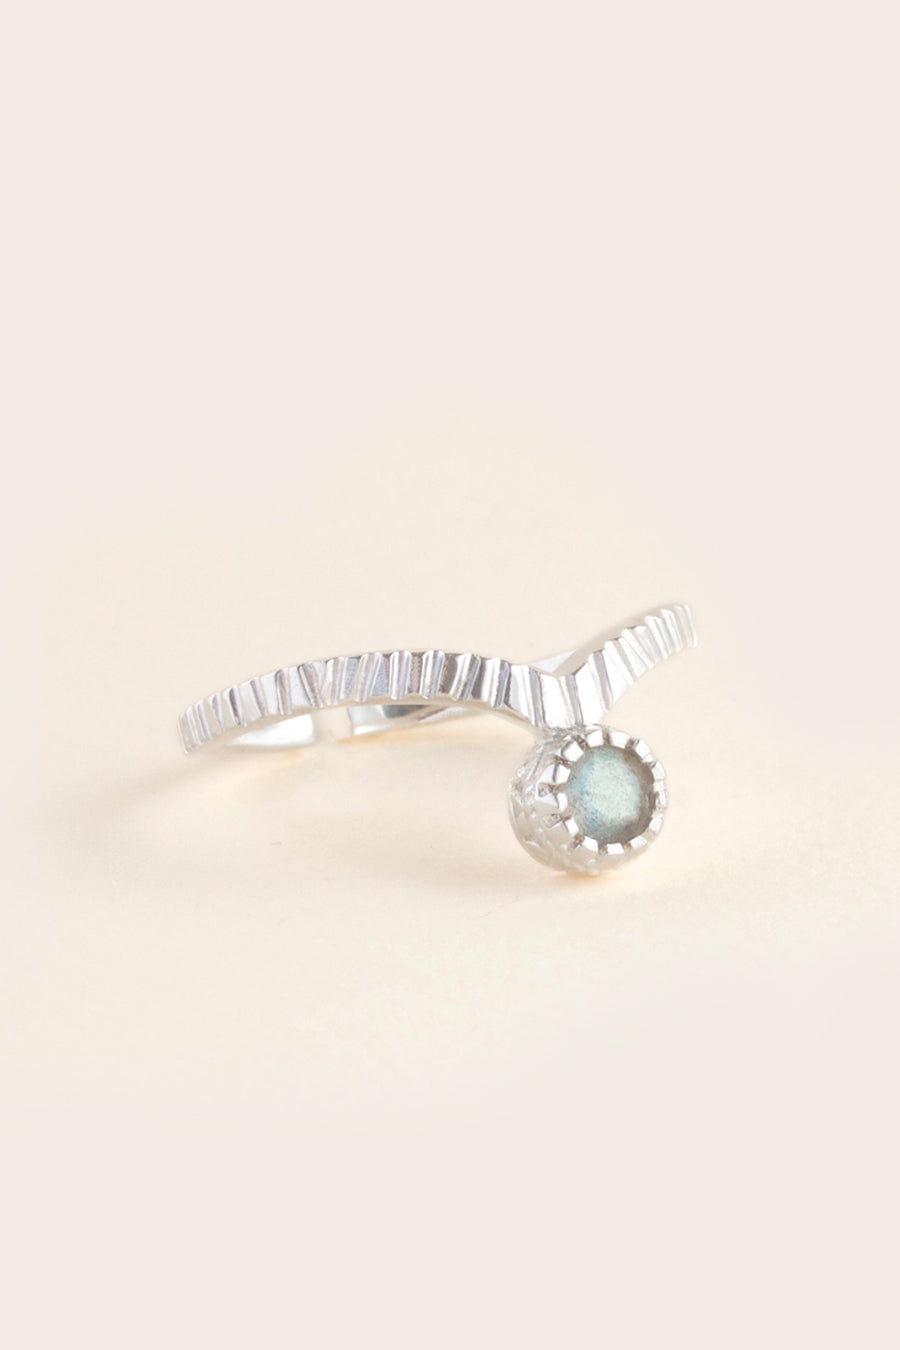 Silver stacking ring with crystal gemstone